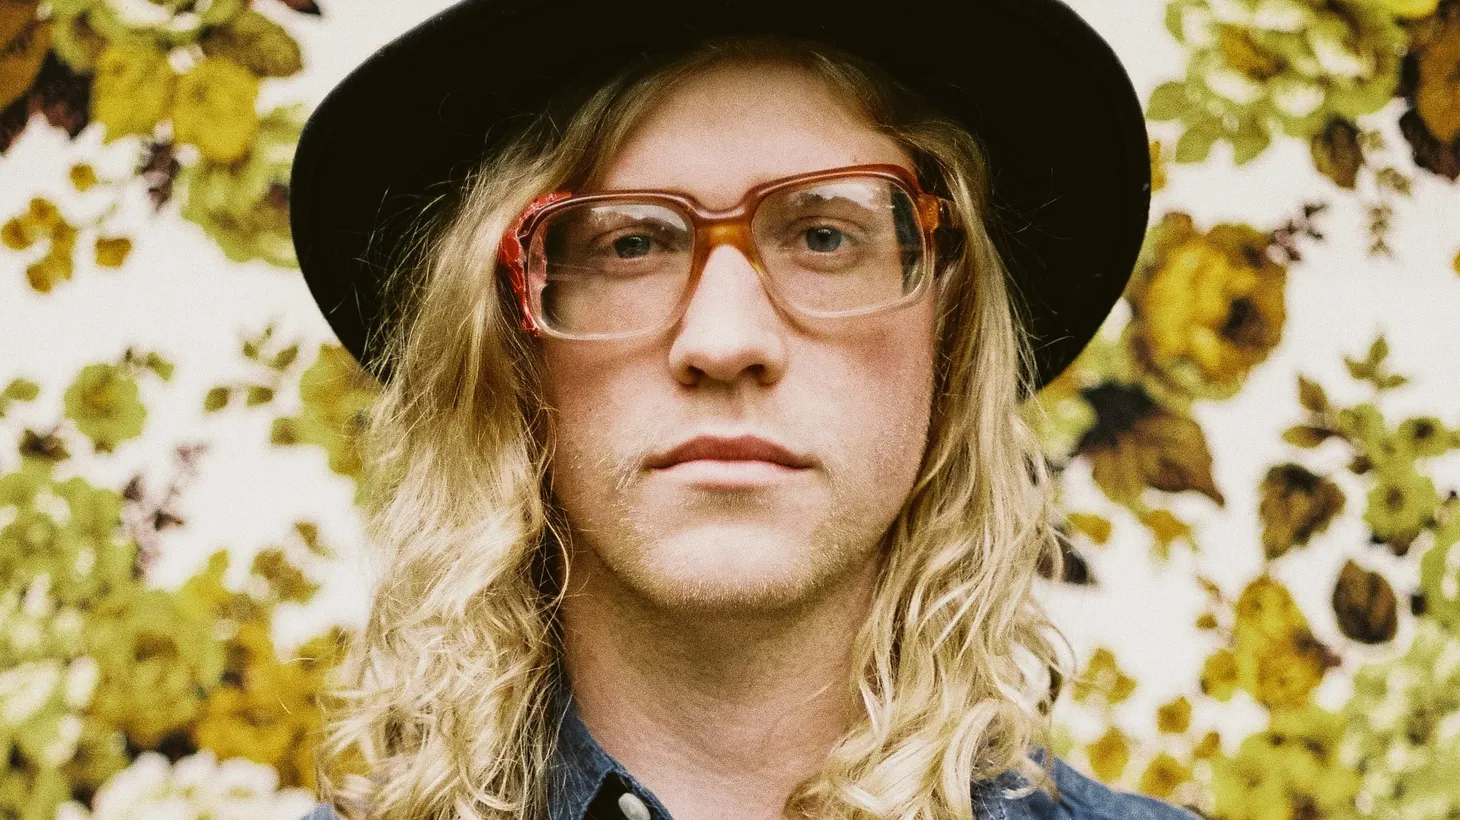 R&B singer Allen Stone has been gaining steam over the last year with a confessional lyrical style that integrates classic soul with catchy hooks.